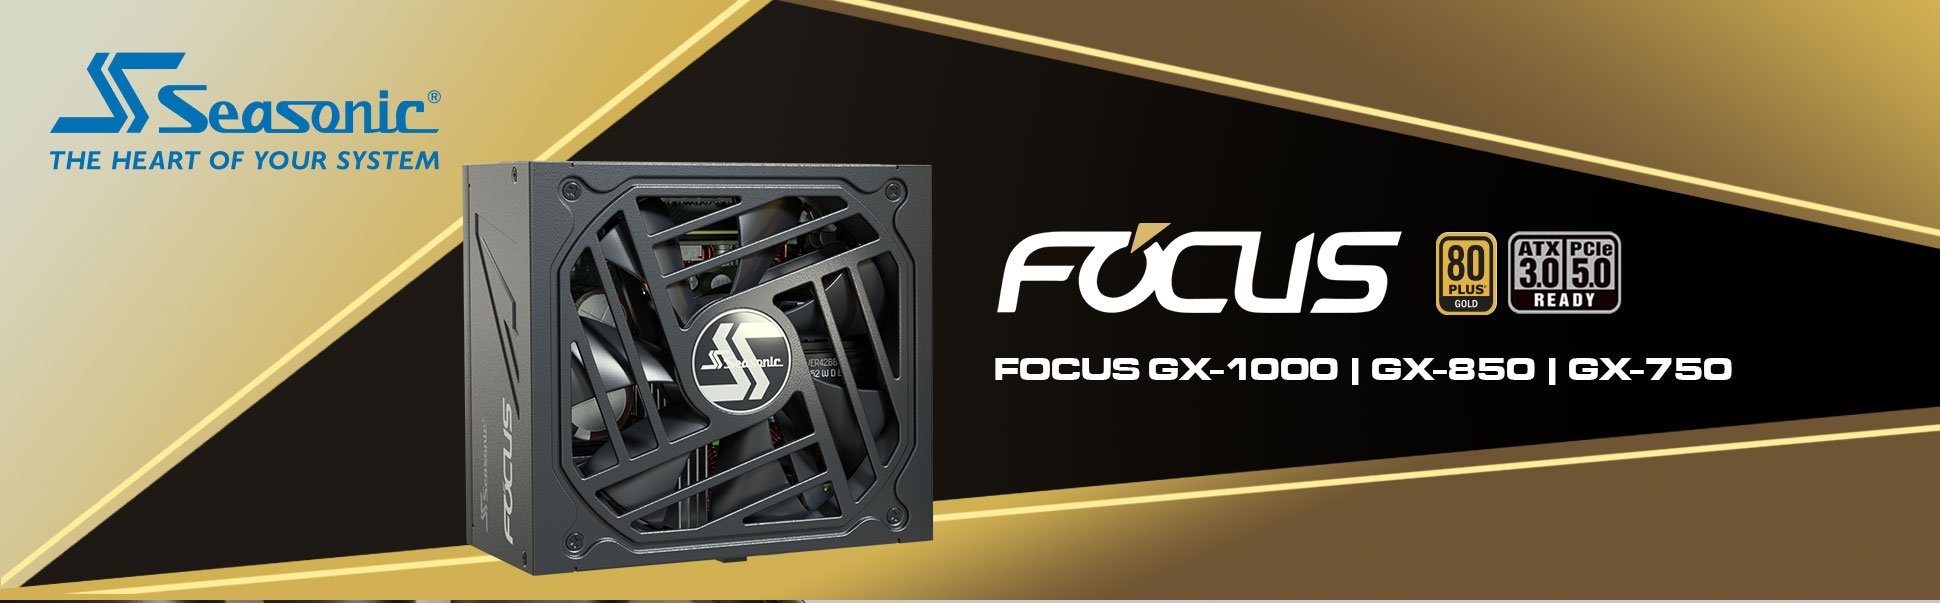 Seasonic FOCUS GX-750, 750W 80+ Gold, Full-Modular, Fan Control in Fanless,  Silent, and Cooling Mode, Perfect Power Supply for Gaming and Various  Application, SSR-750FX. : Electronics 